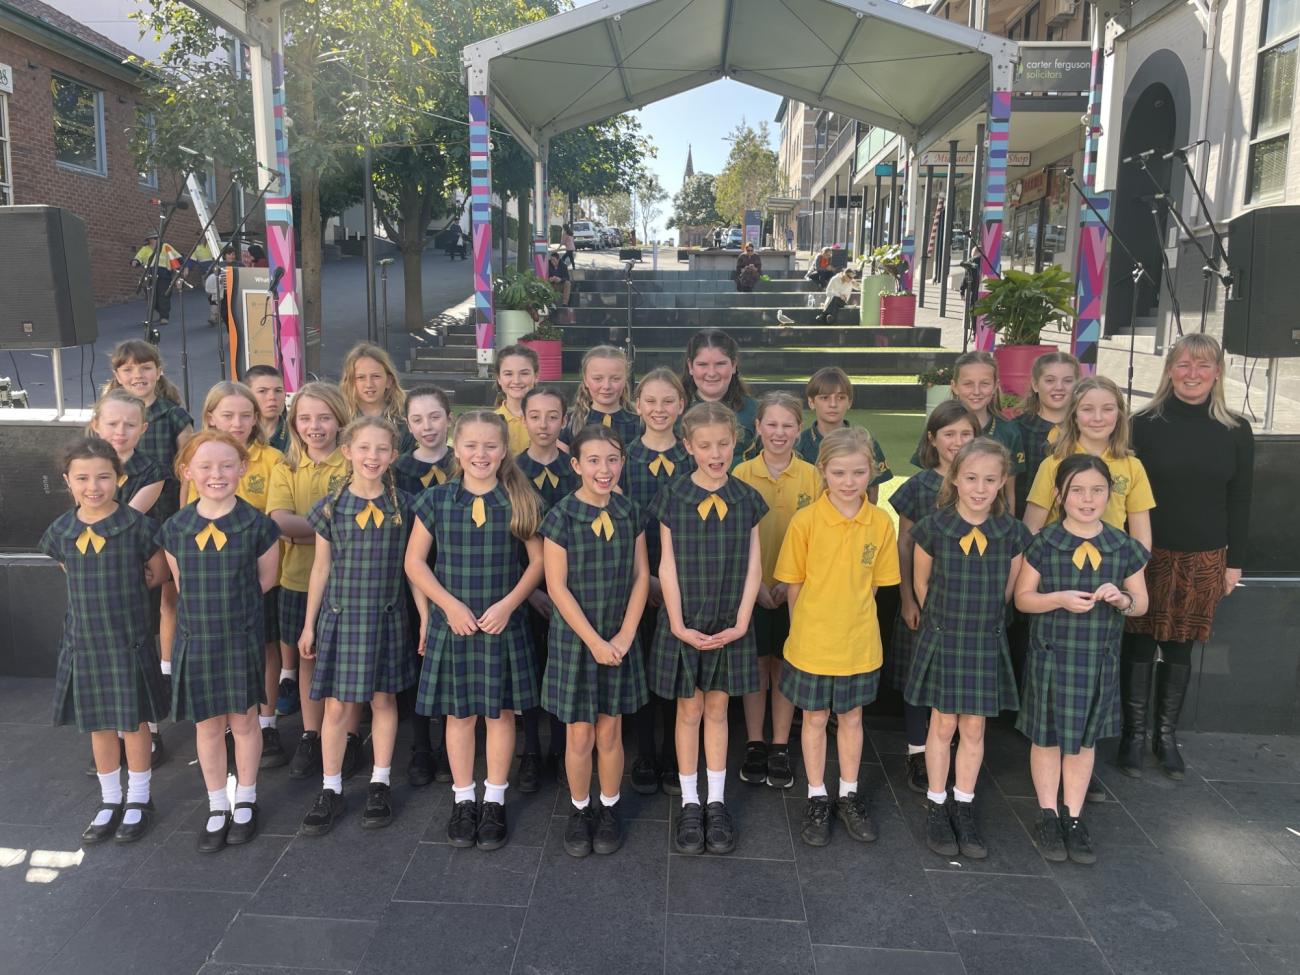 Stanwell Park Public School Choir standing in front of the stage in school uniform for photo